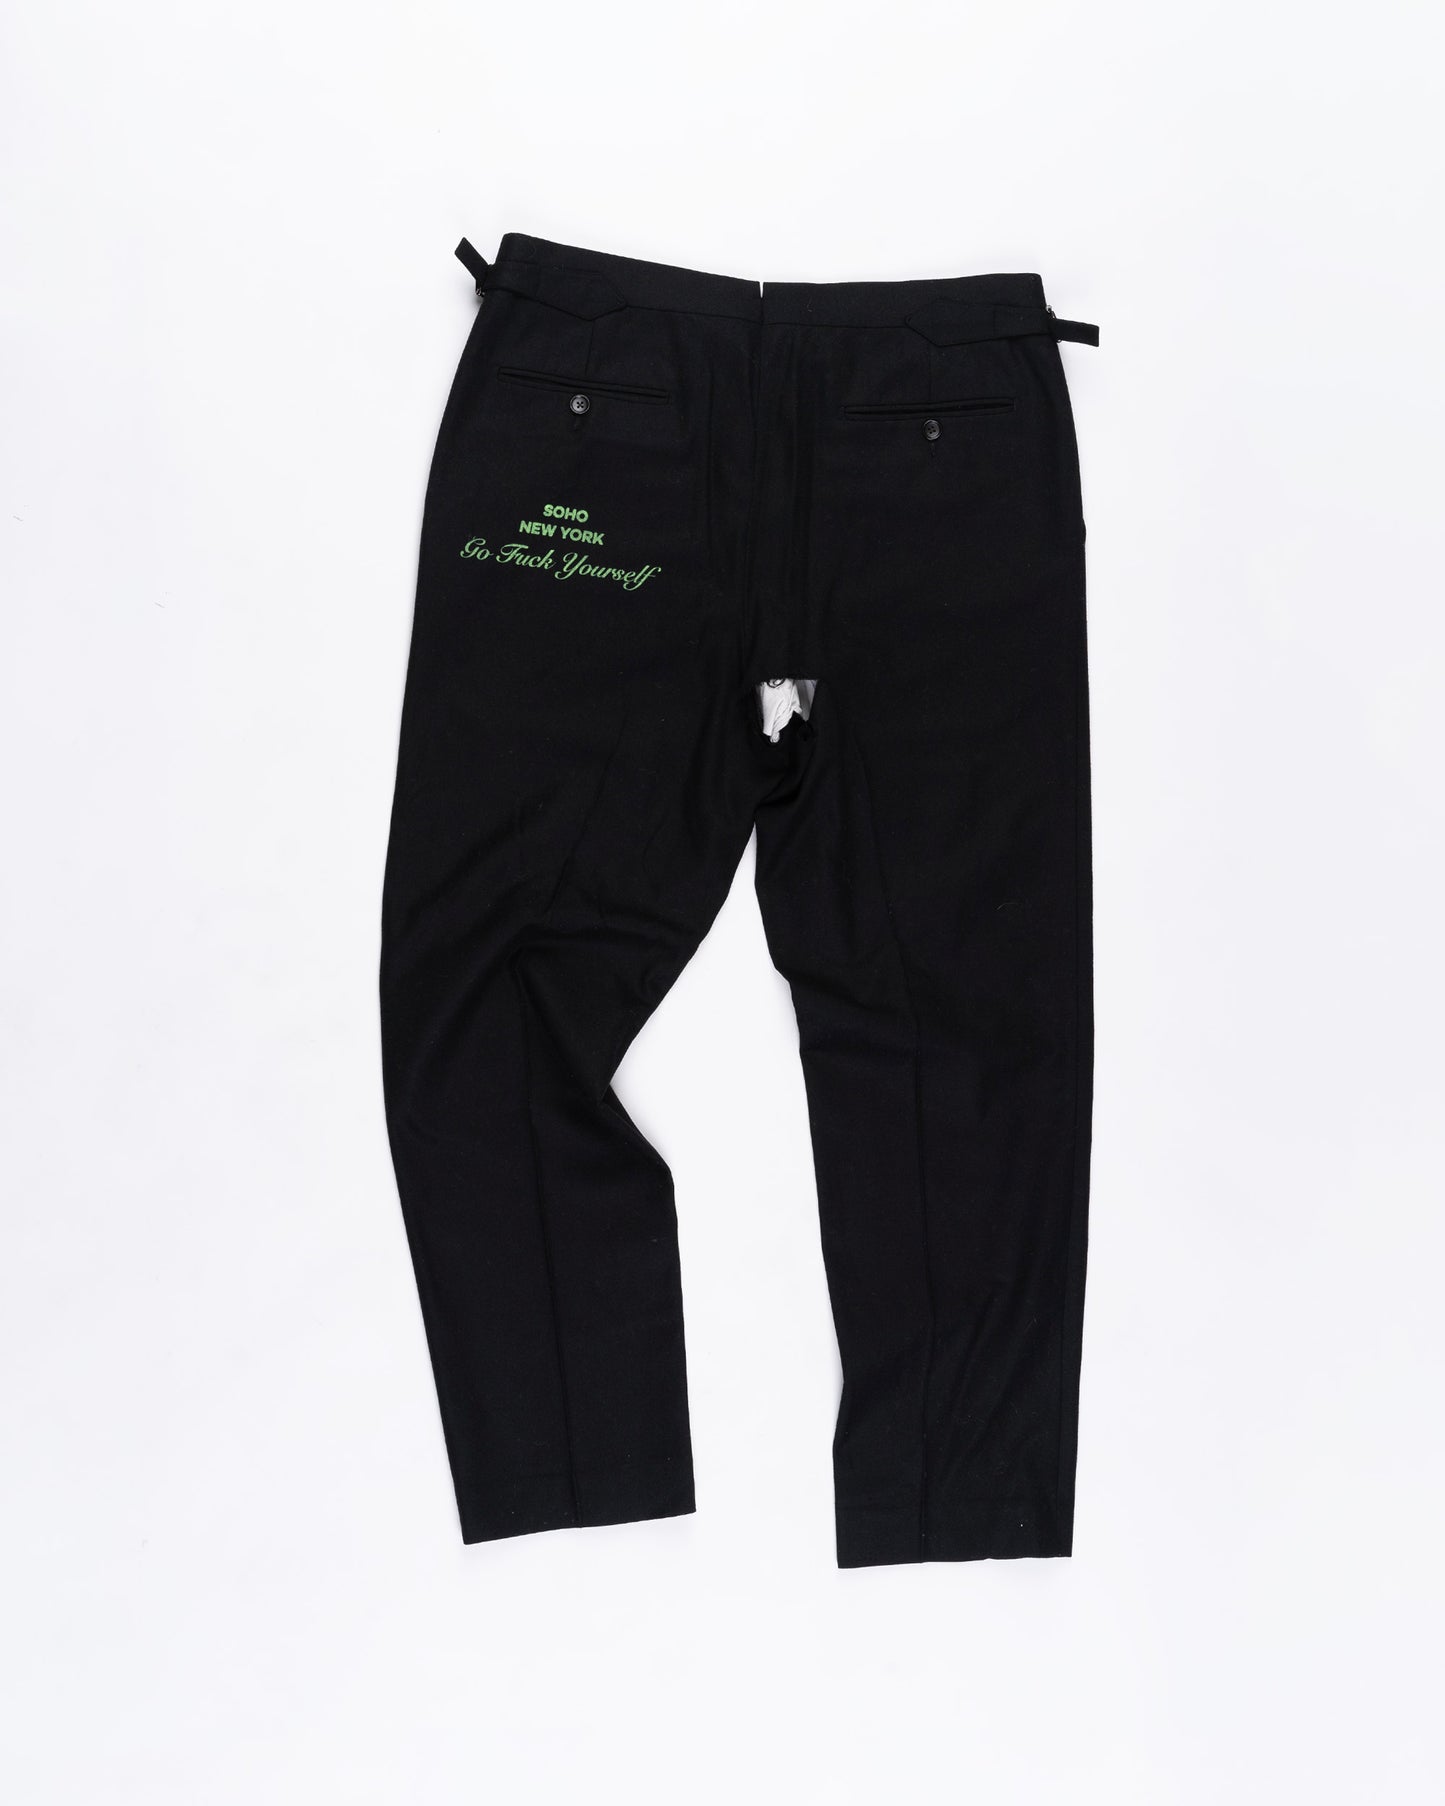 Wool Suiting Trouser Size: 25